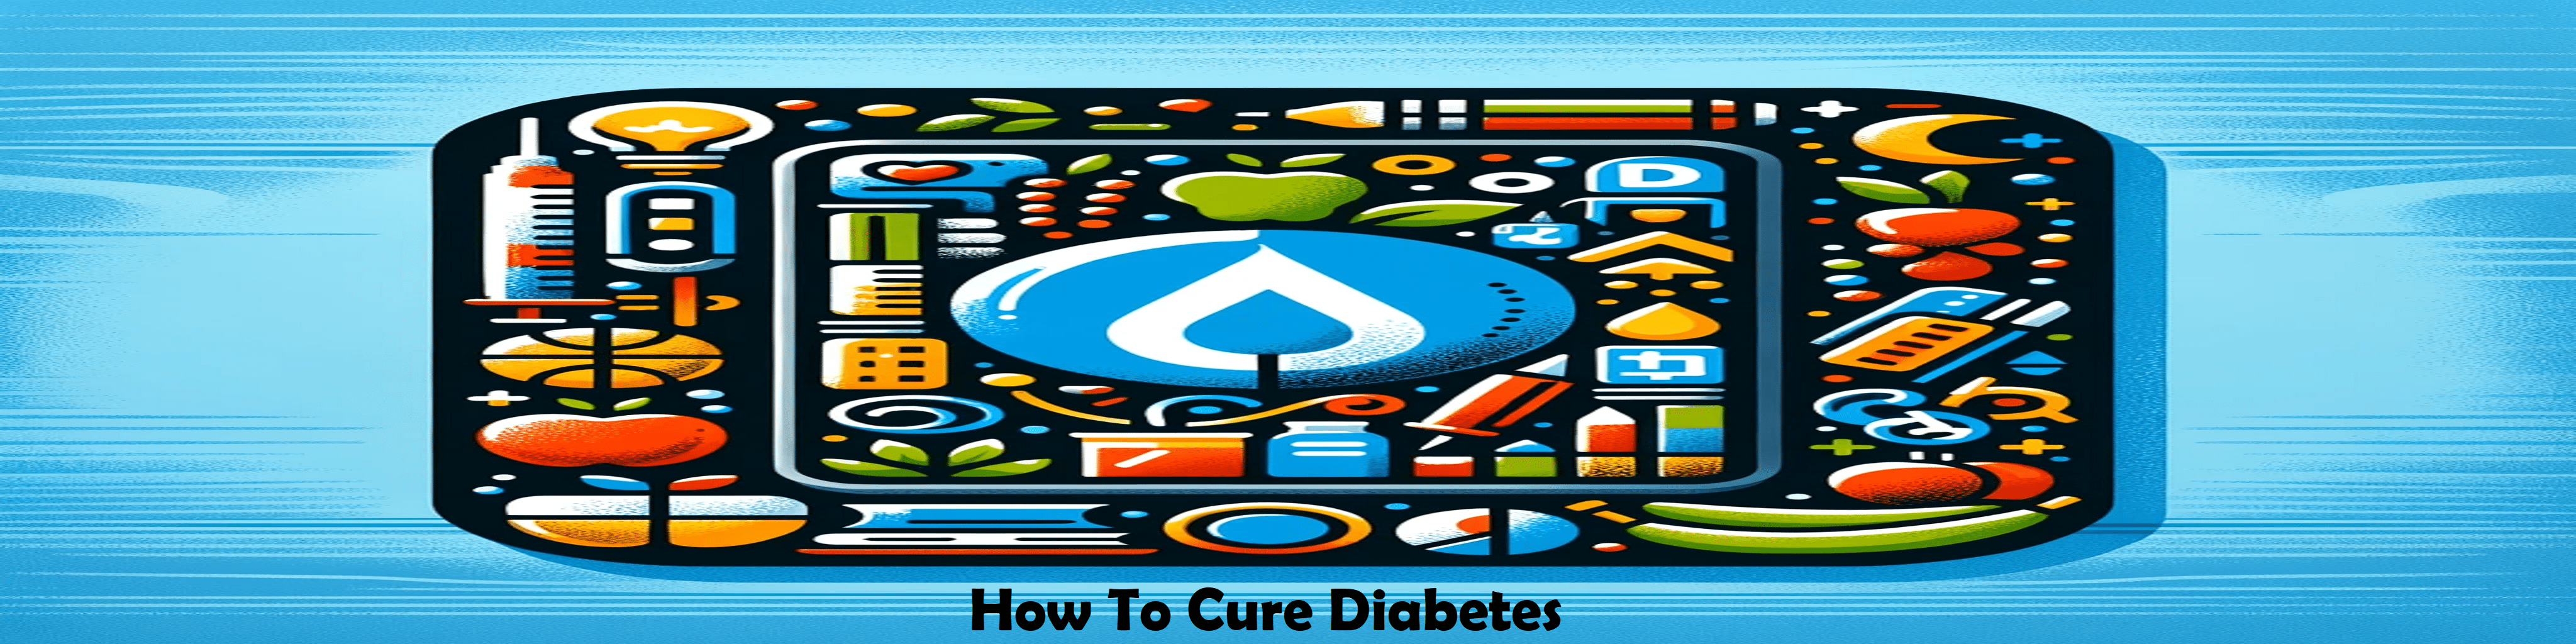 How To Cure Diabetes